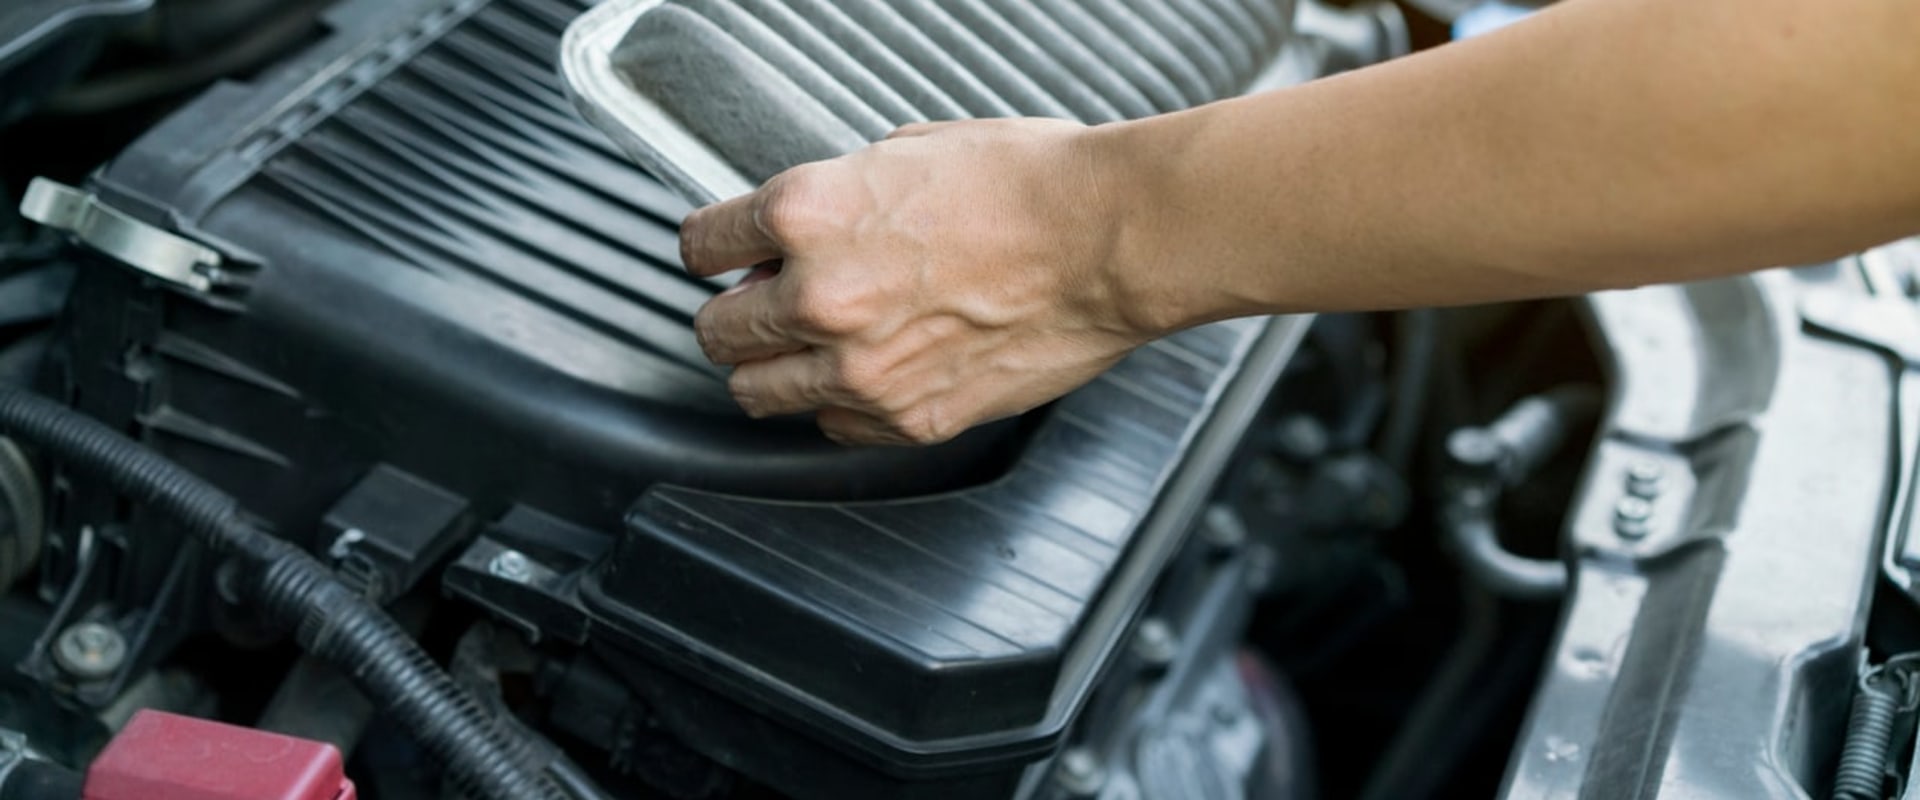 What are the Consequences of Not Replacing Your Car's Air Filter?